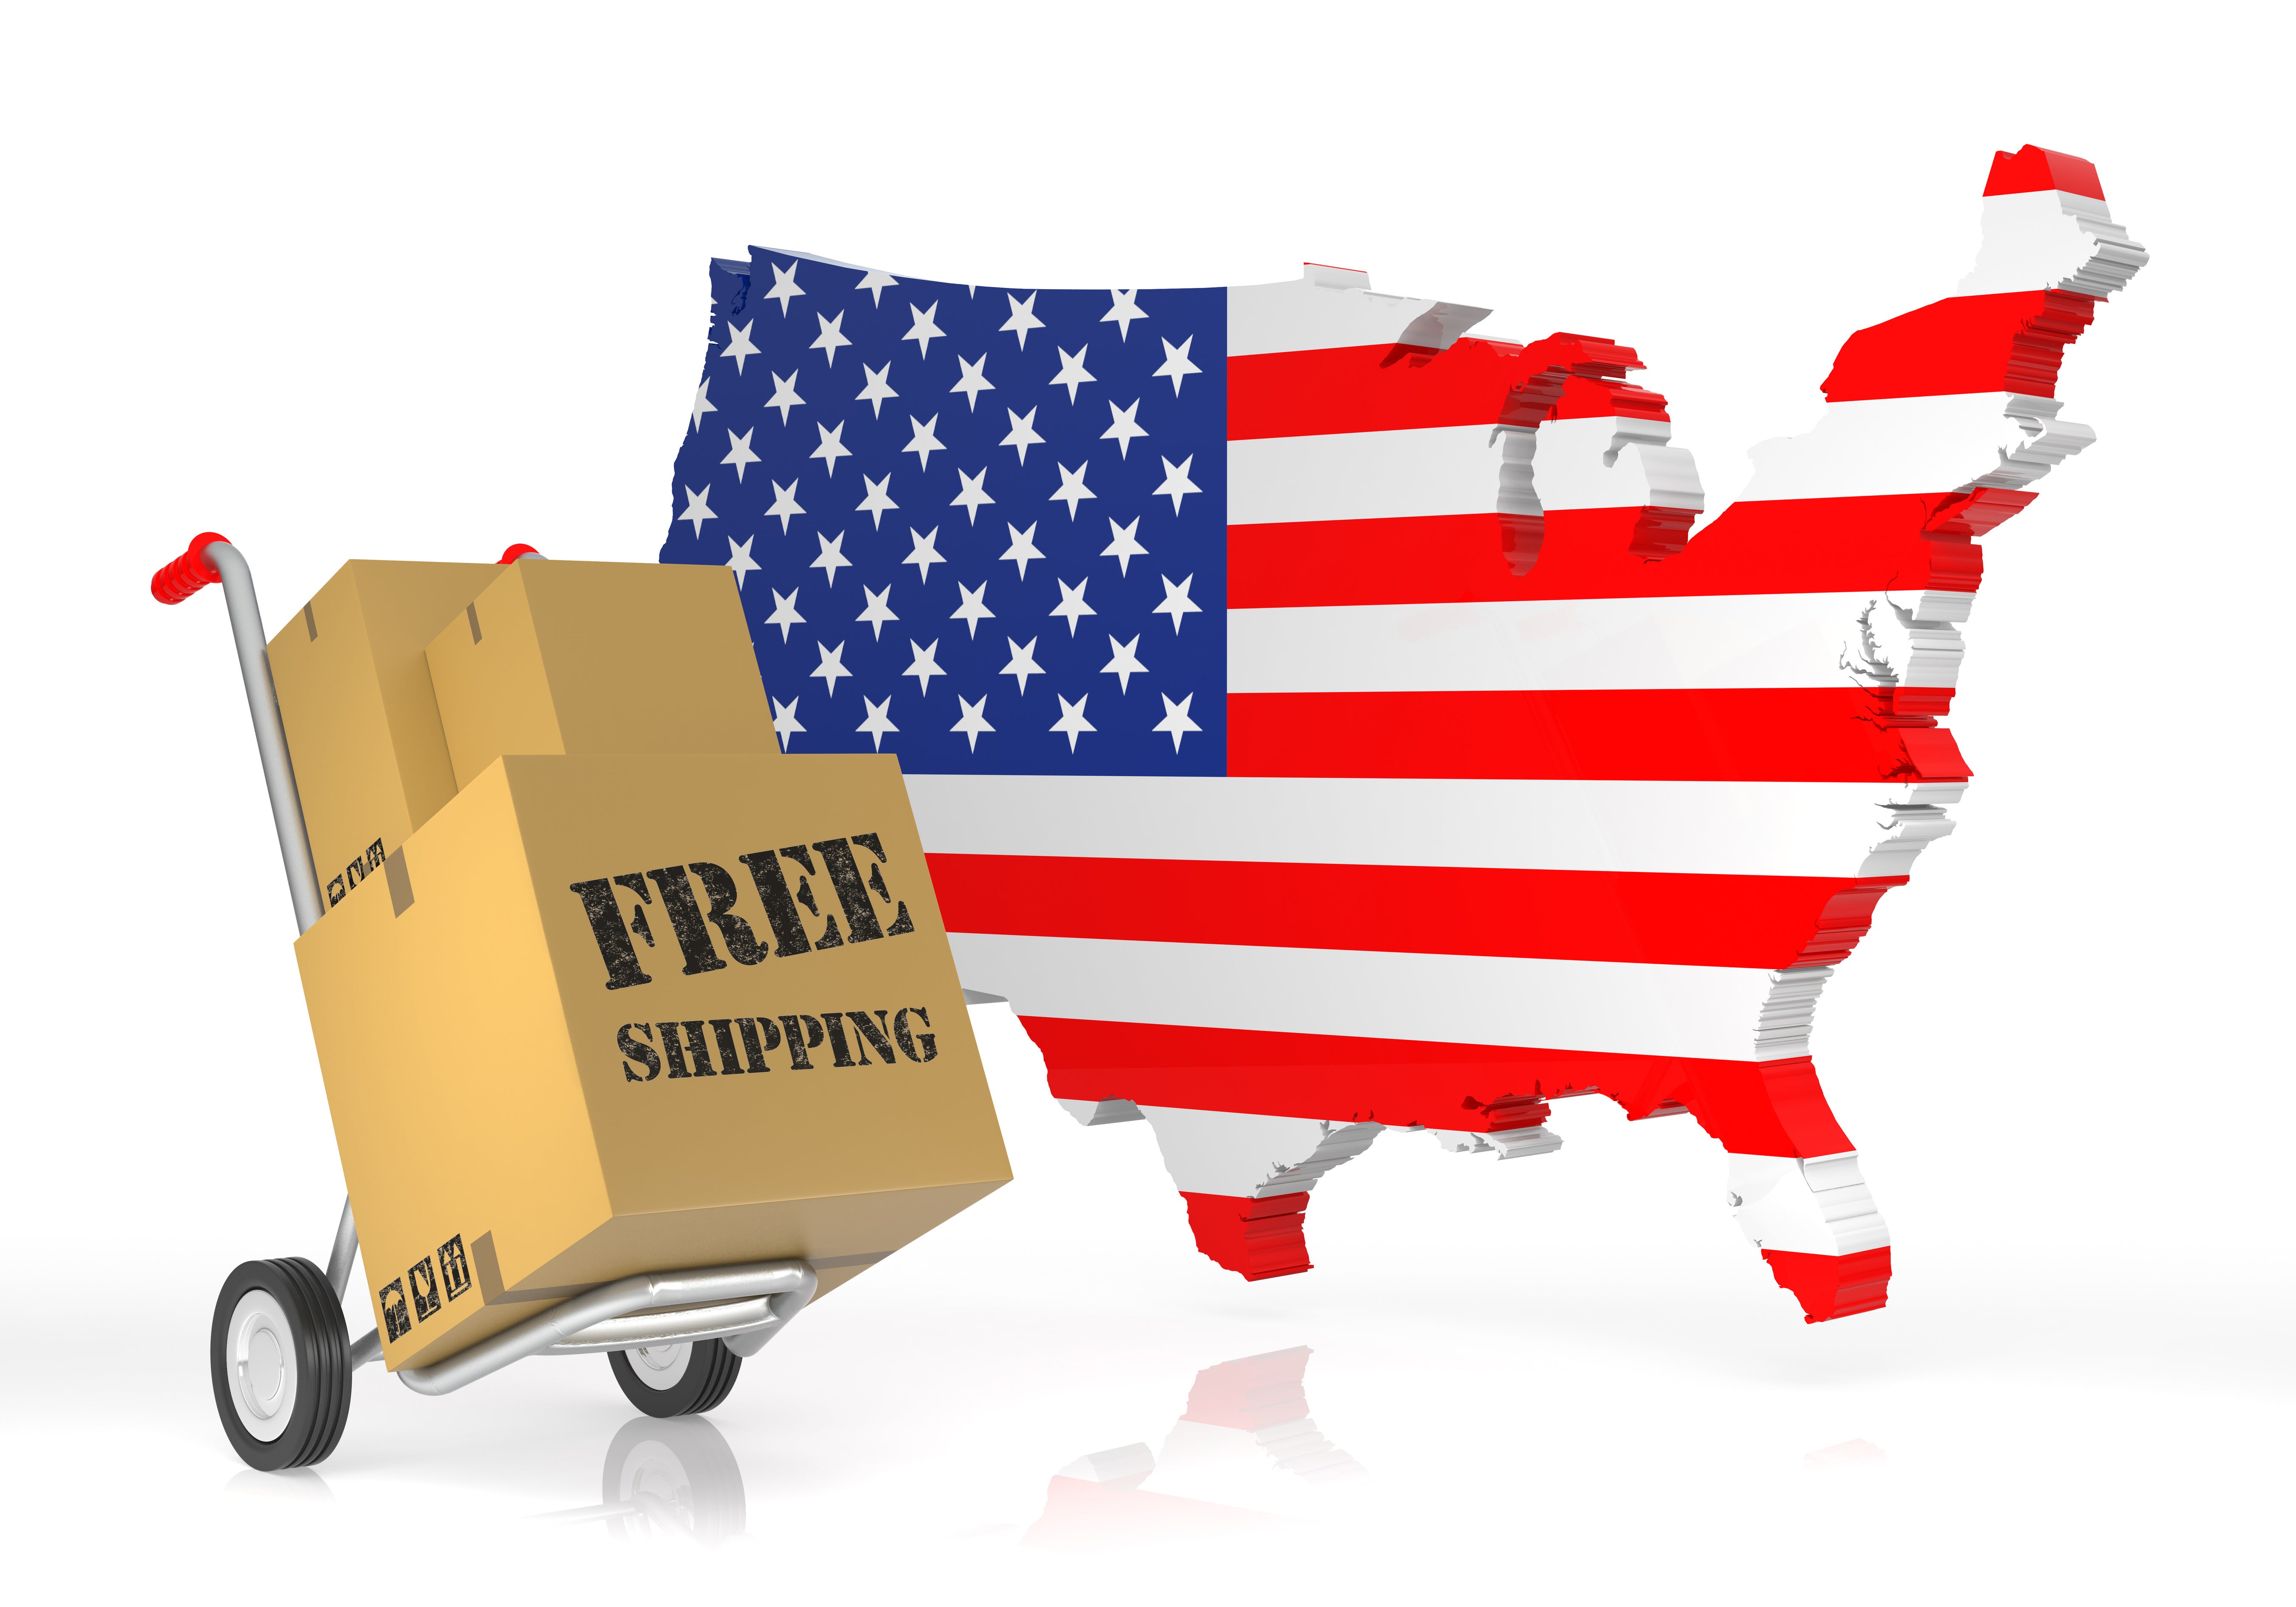 Free Shipping Boxes and US Flag